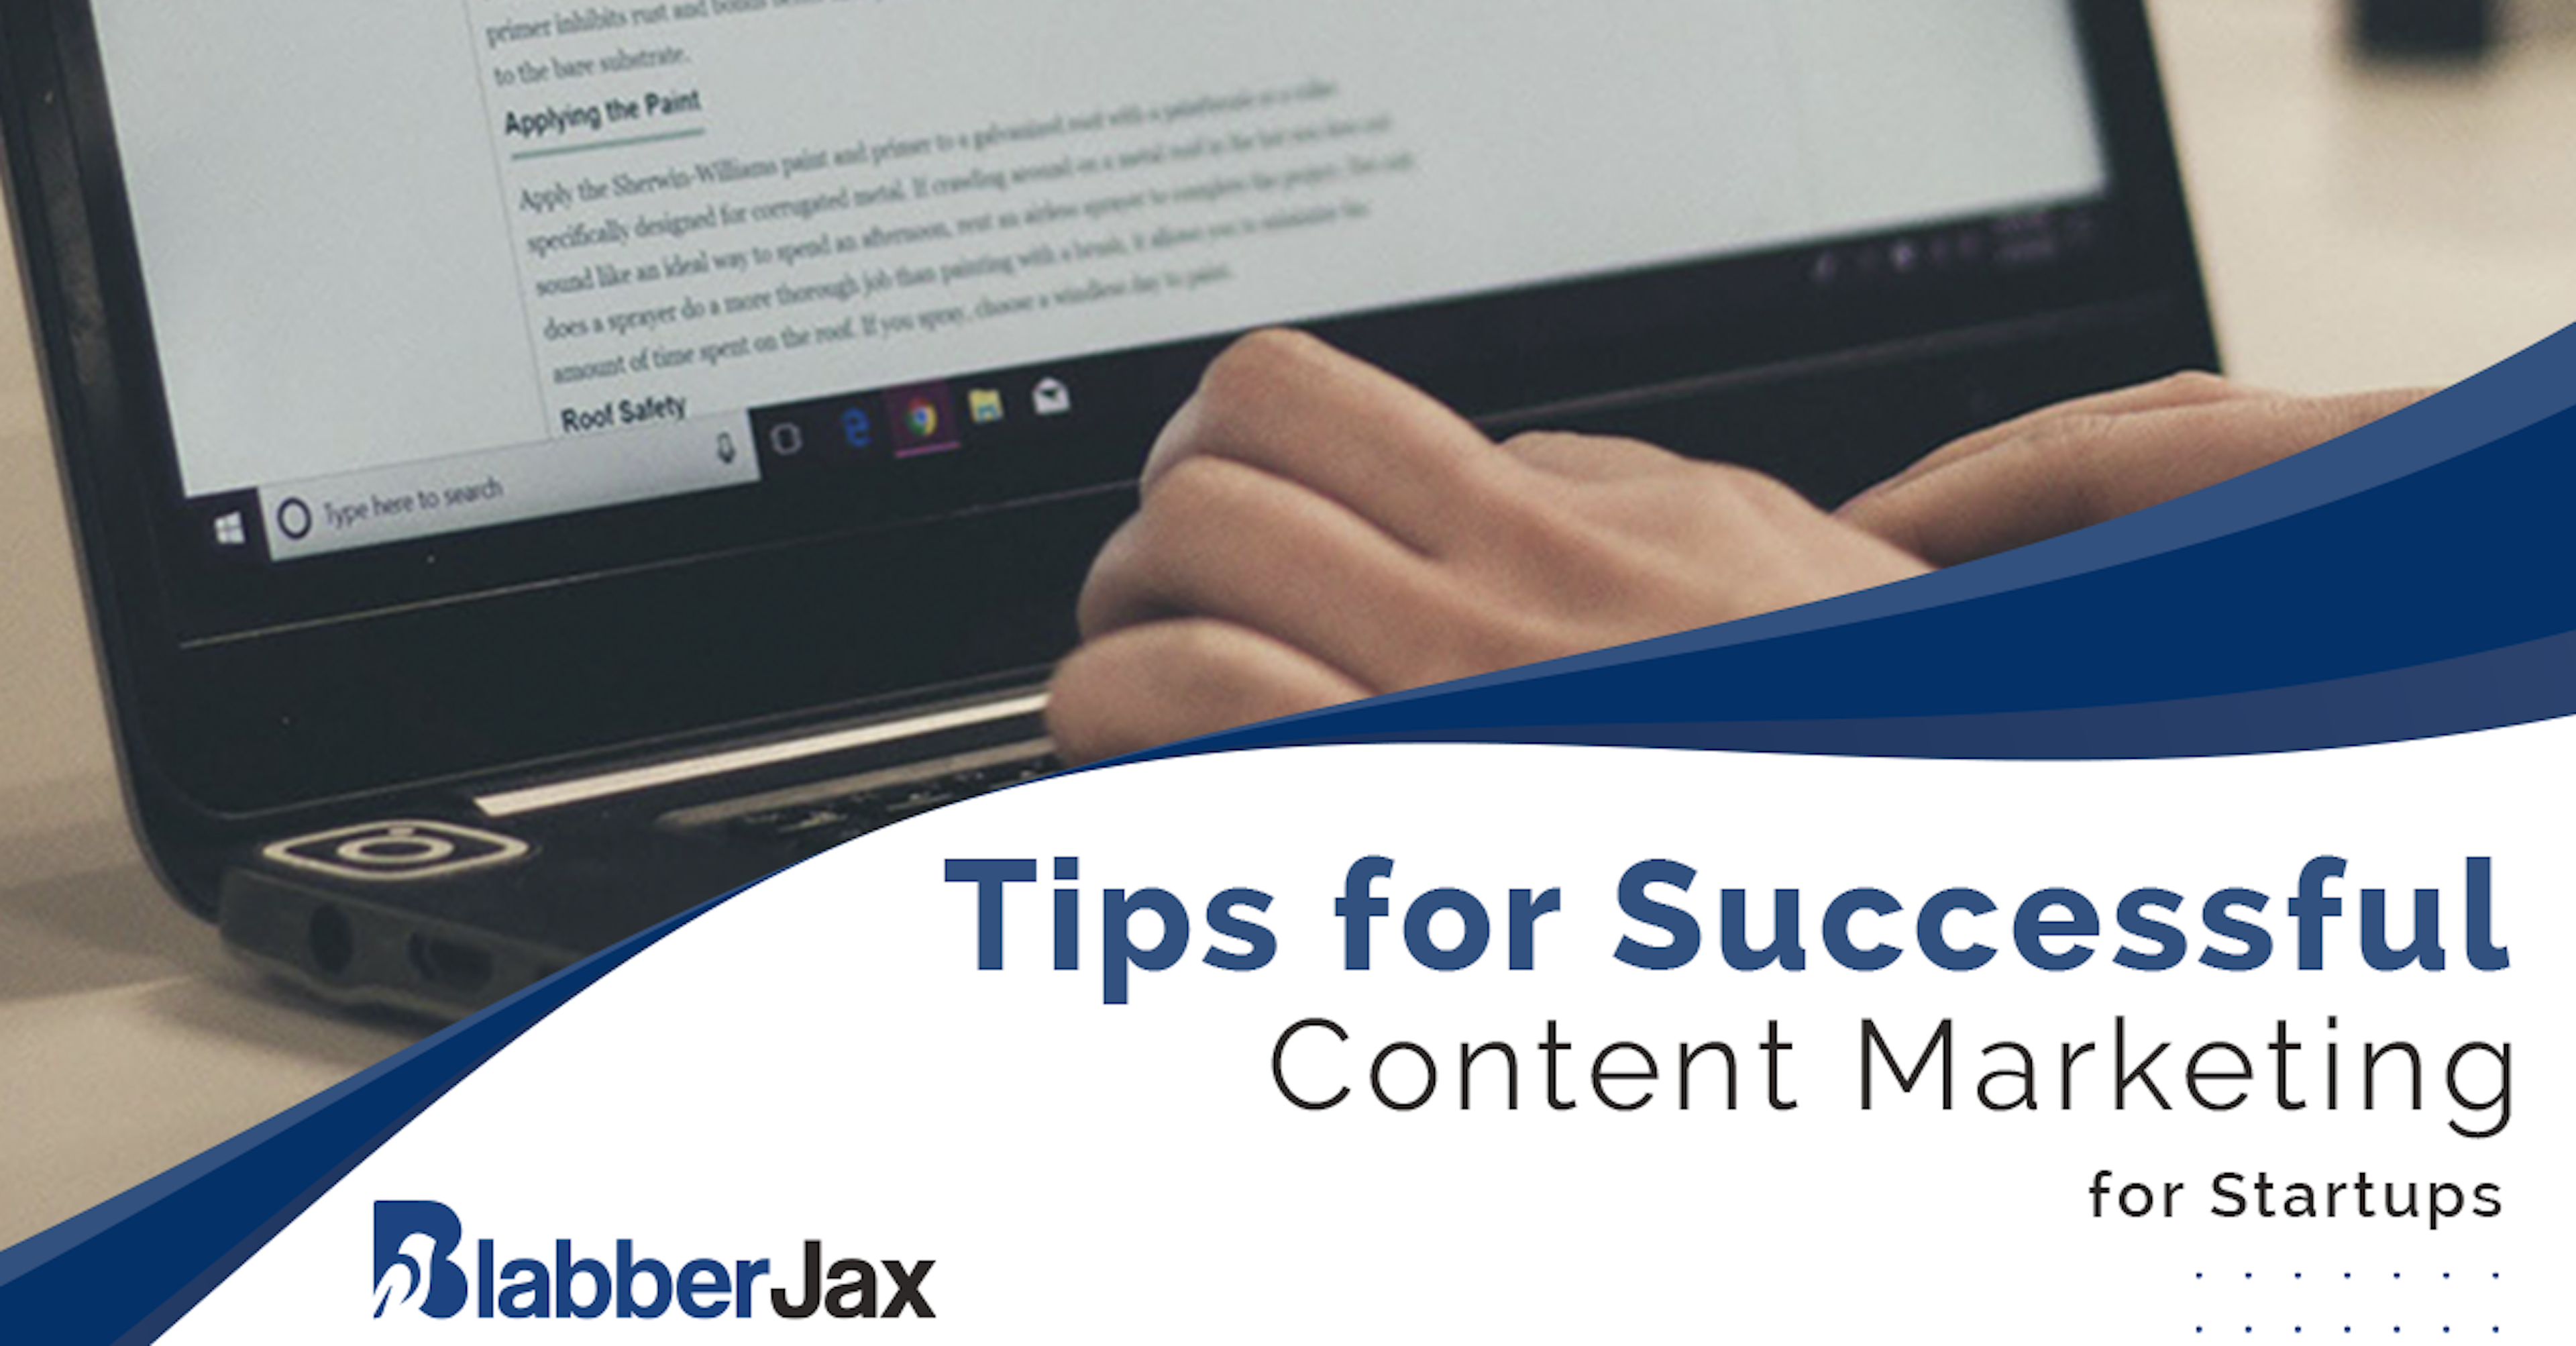 Tips for Successful Content Marketing for Startups